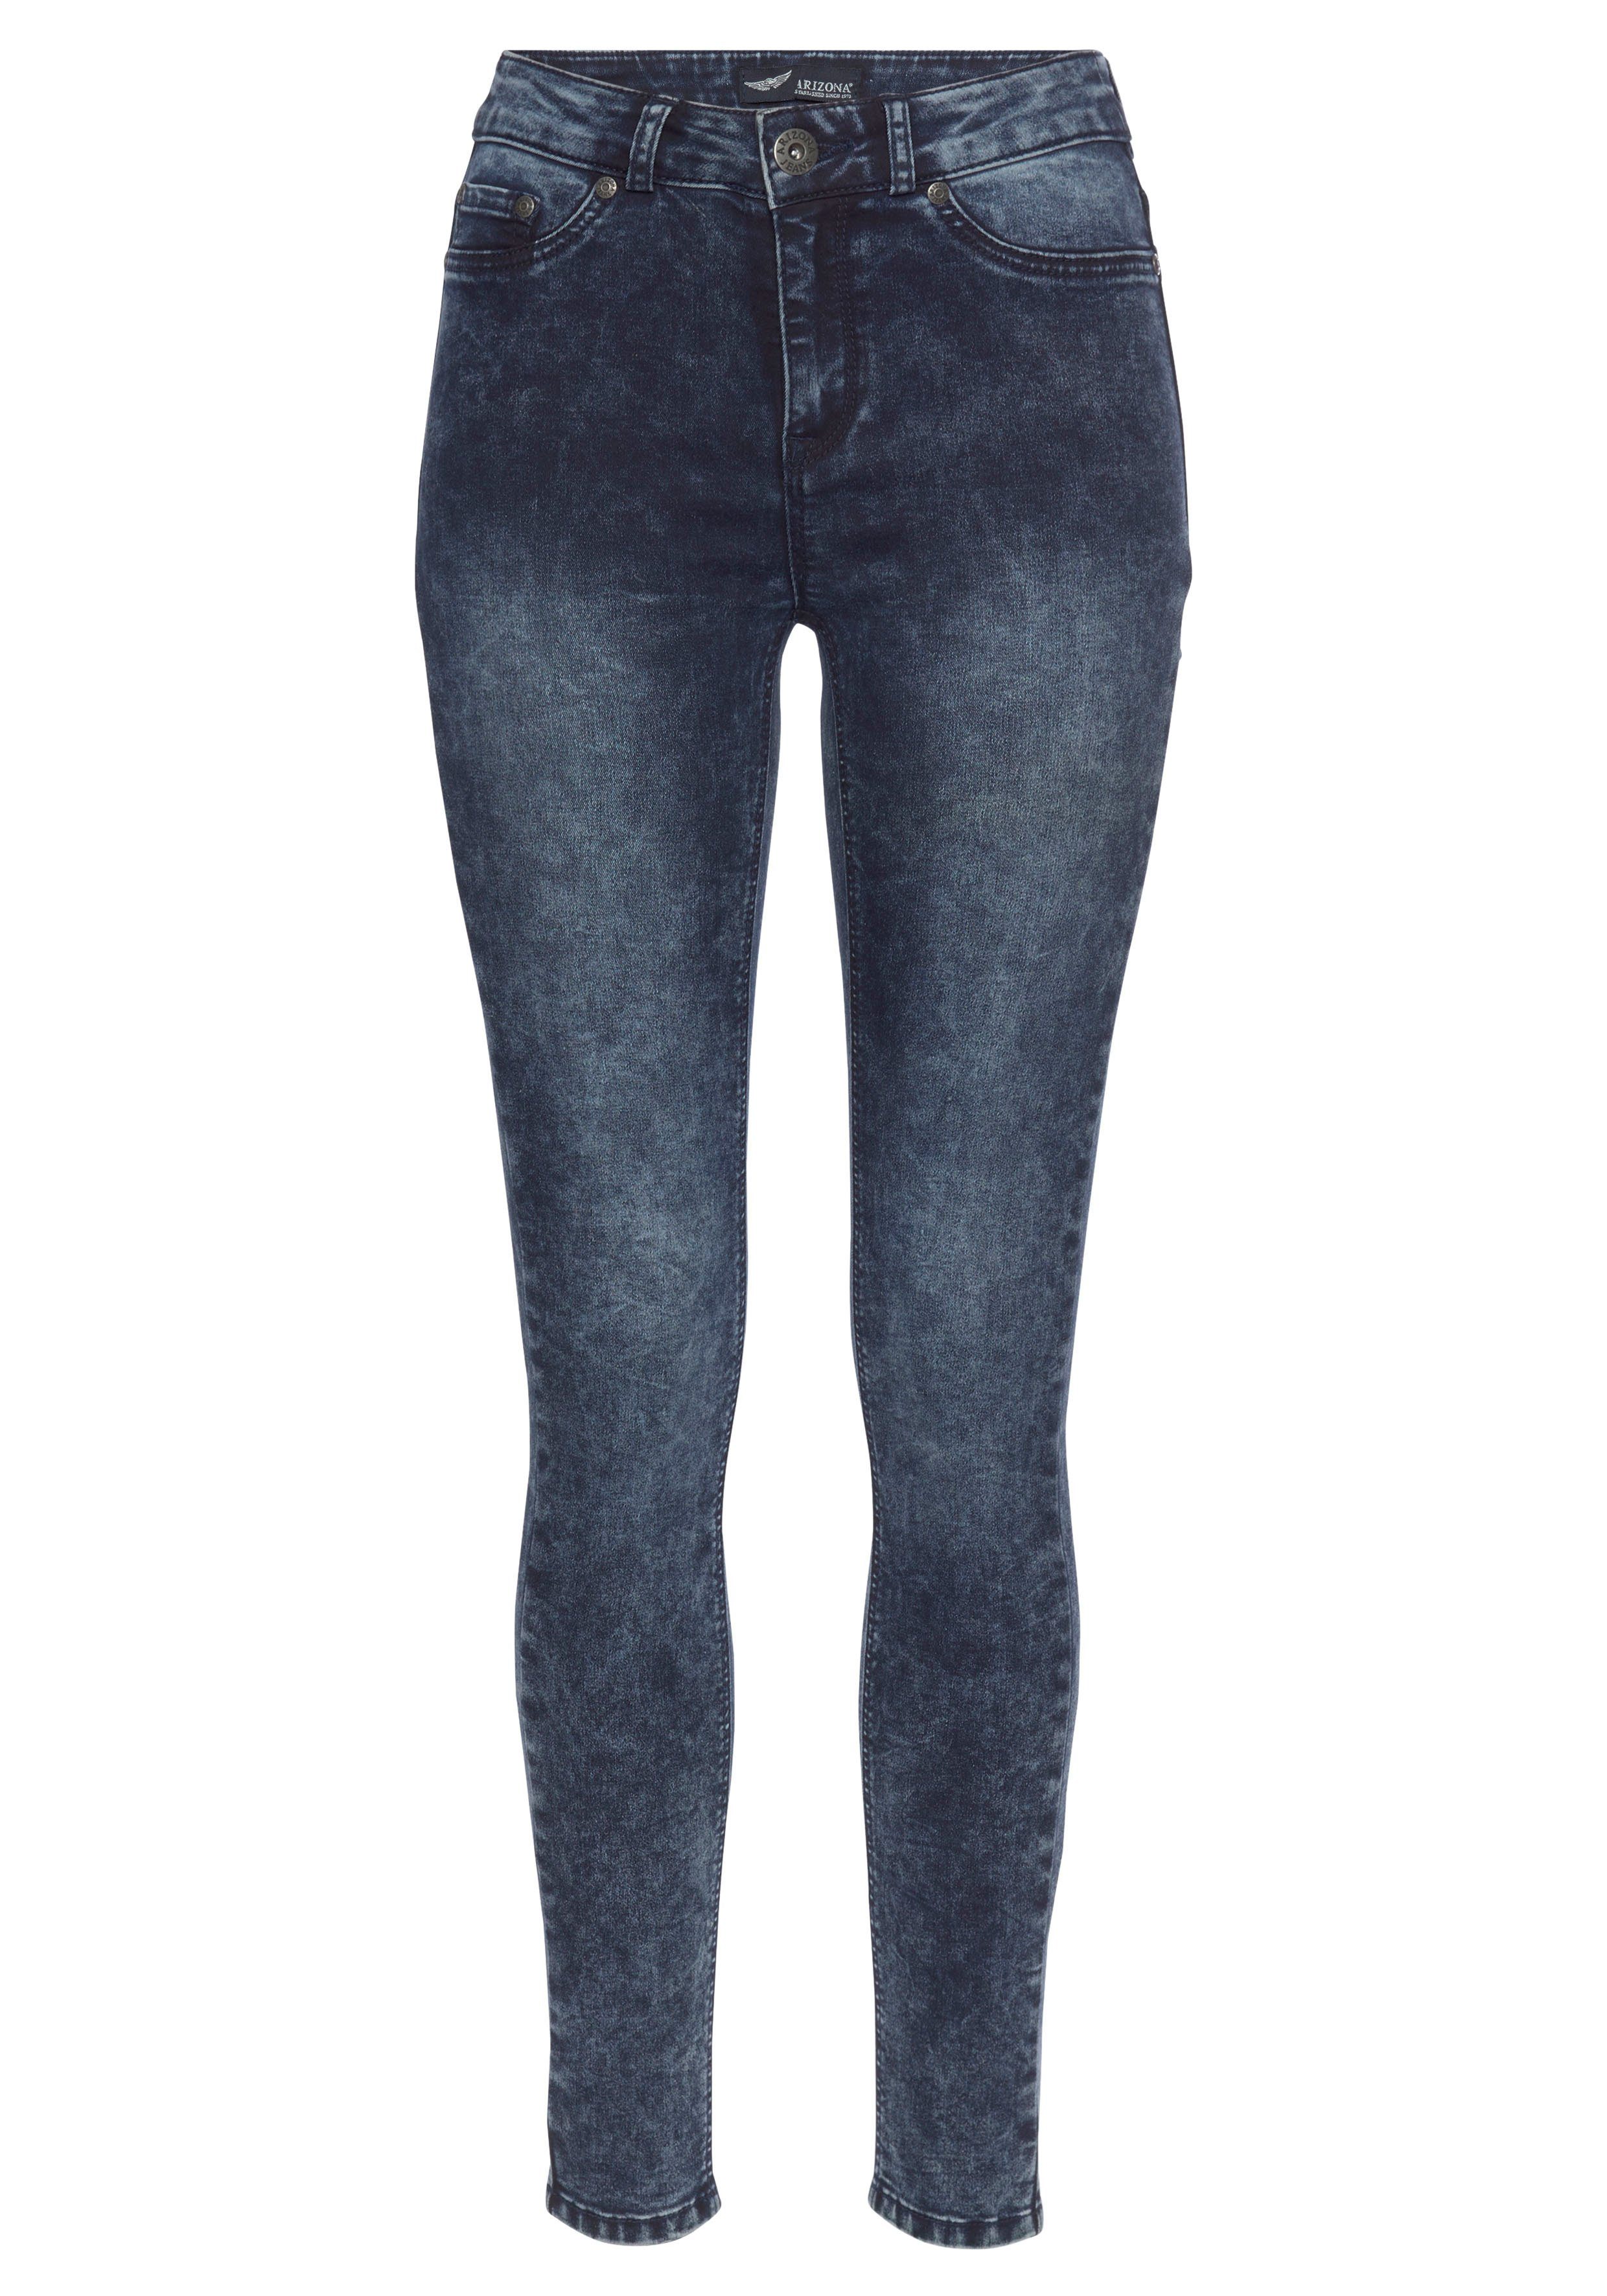 Arizona Skinny-fit-Jeans Ultra Stretch Jeans darkblue-moonwashed moon Moonwashed washed